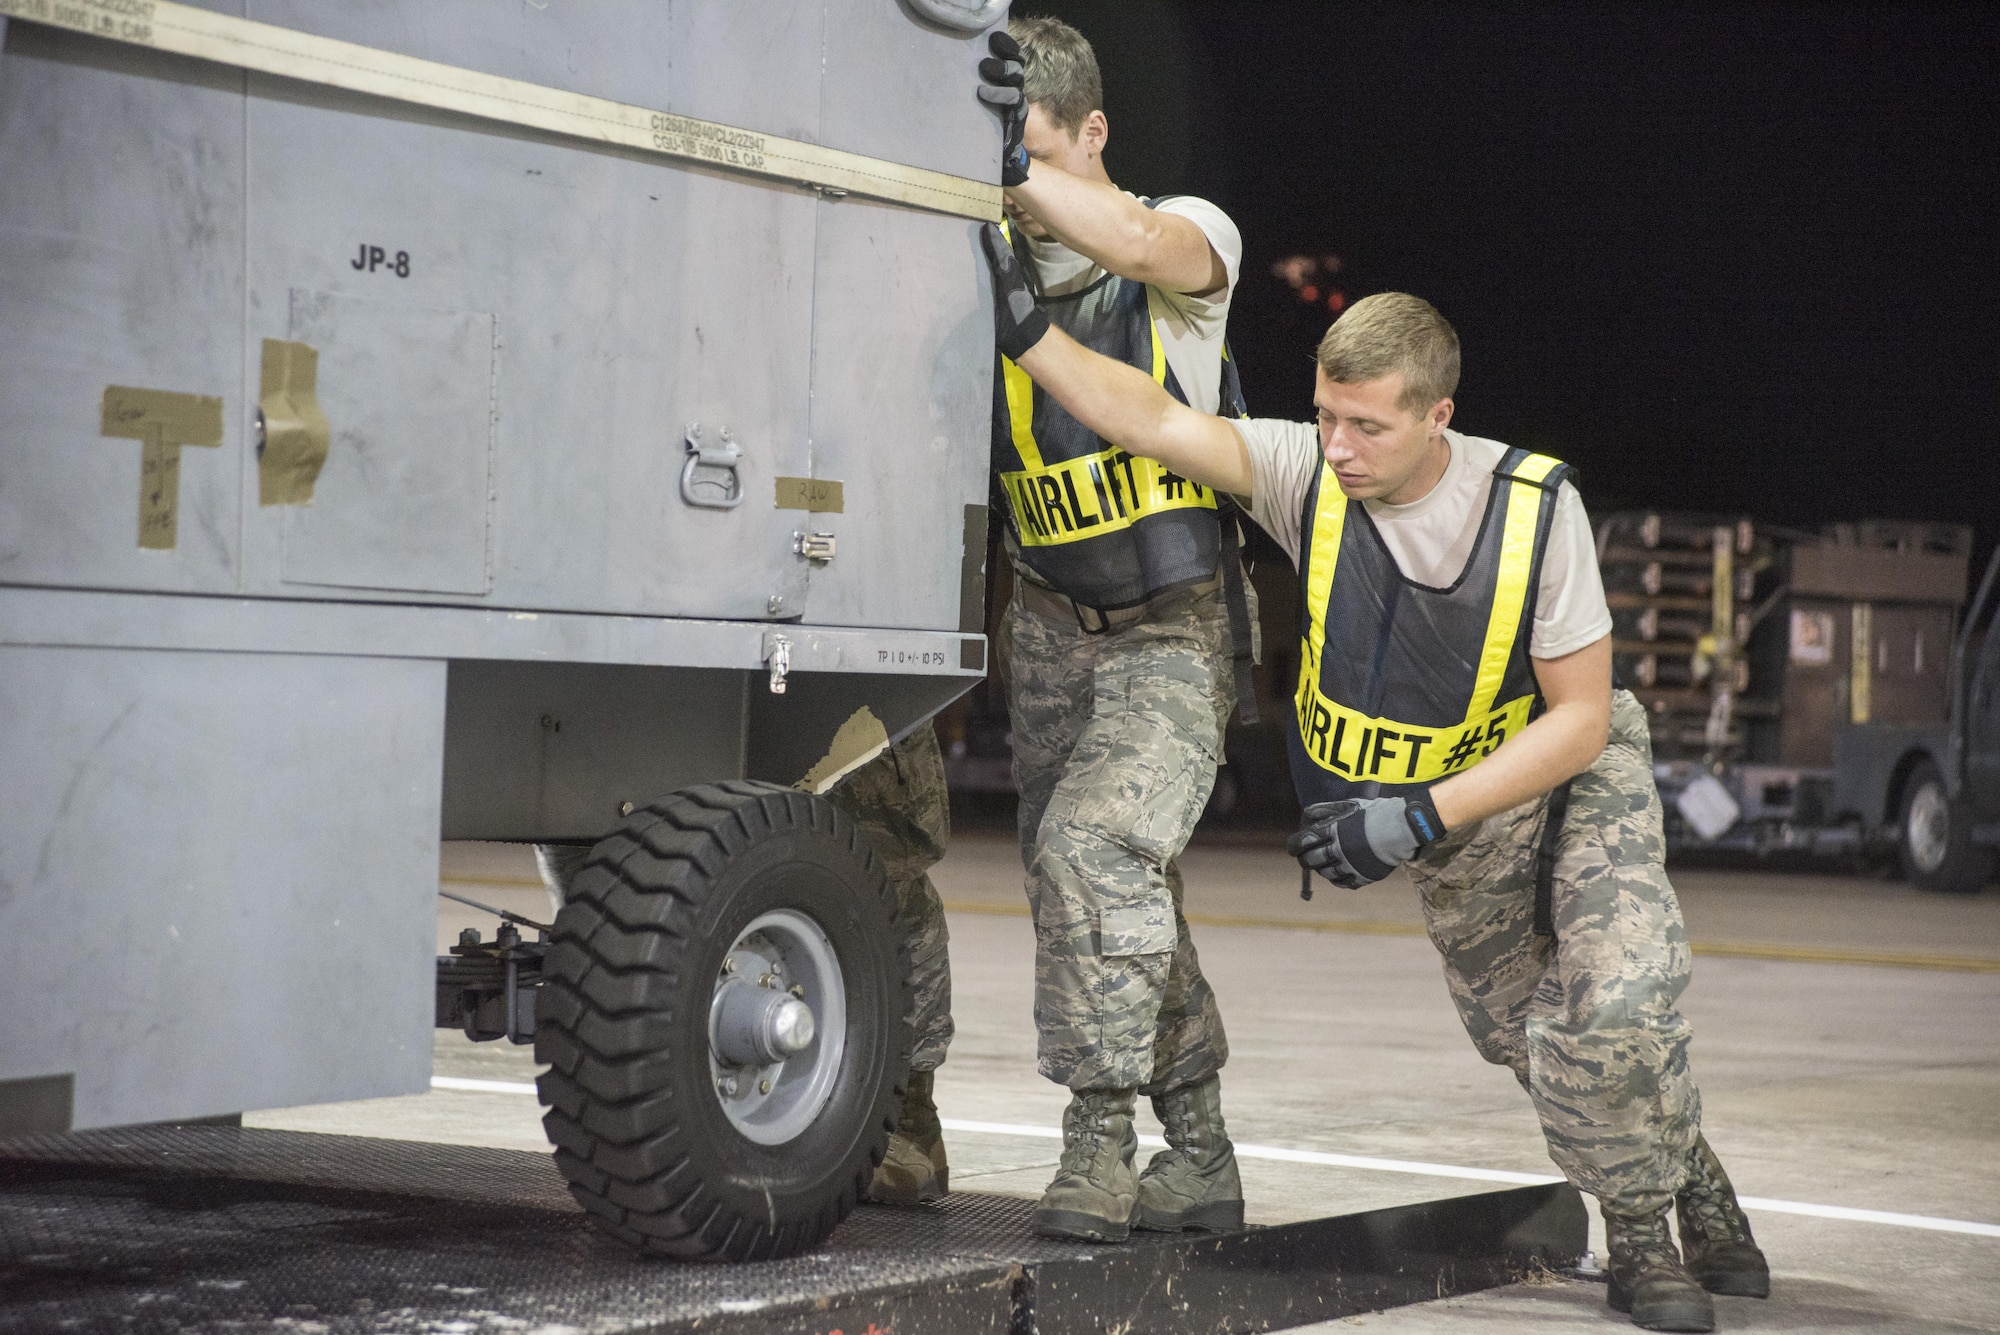 Crew chiefs with the 4th Aircraft Maintenance Squadron push a hydrogen cart into a vehicle roll-on scale July 20, 2017, at Seymour Johnson Air Force Base, North Carolina. With the help of travel management office, the crew chiefs were able to weigh the cart prior to being loaded onto the aircraft. (U.S. Air Force photo by Tech. Sgt. David W. Carbajal)